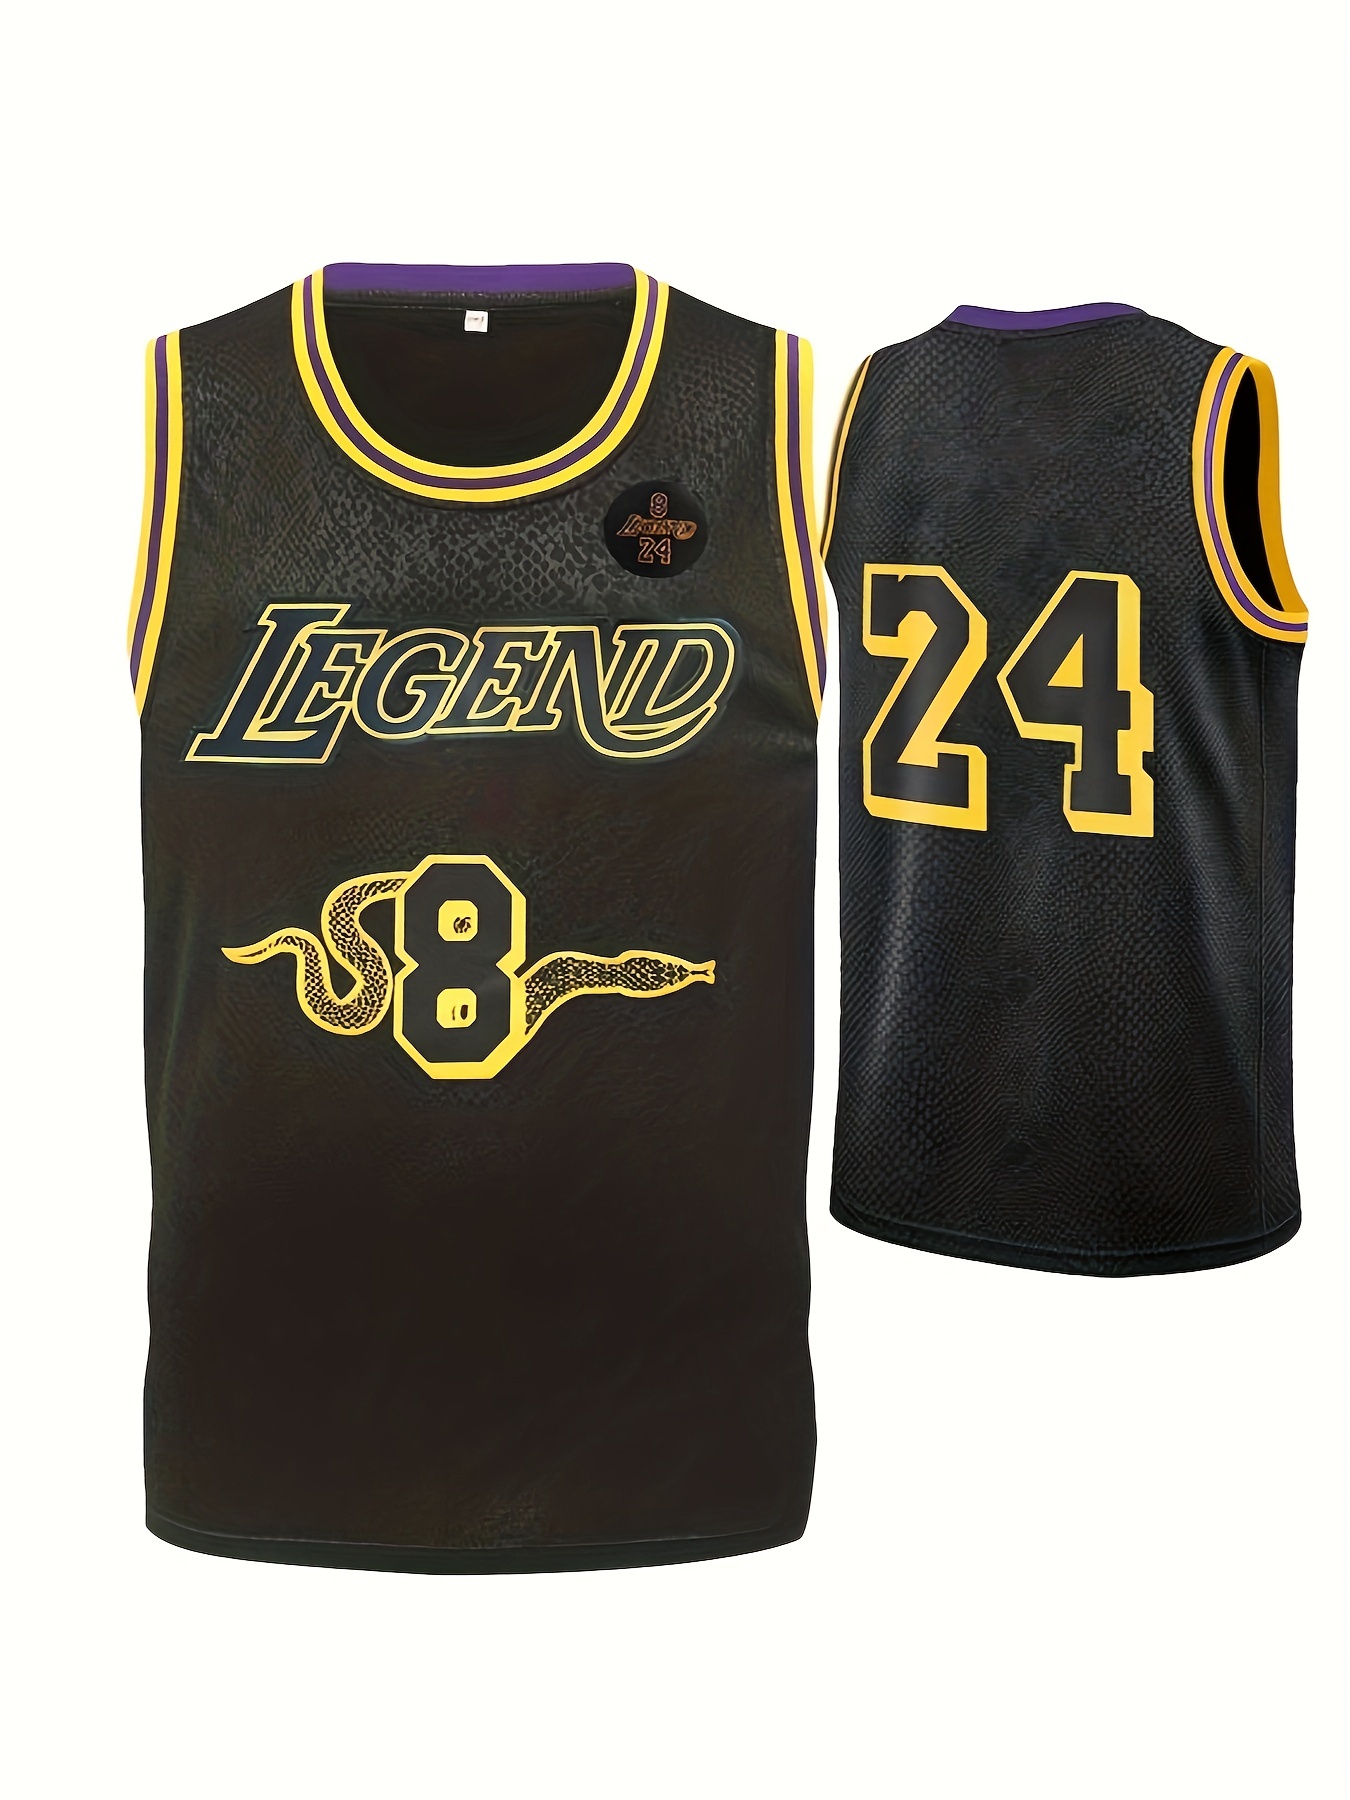 golden state warriors jersey kids 8 years old